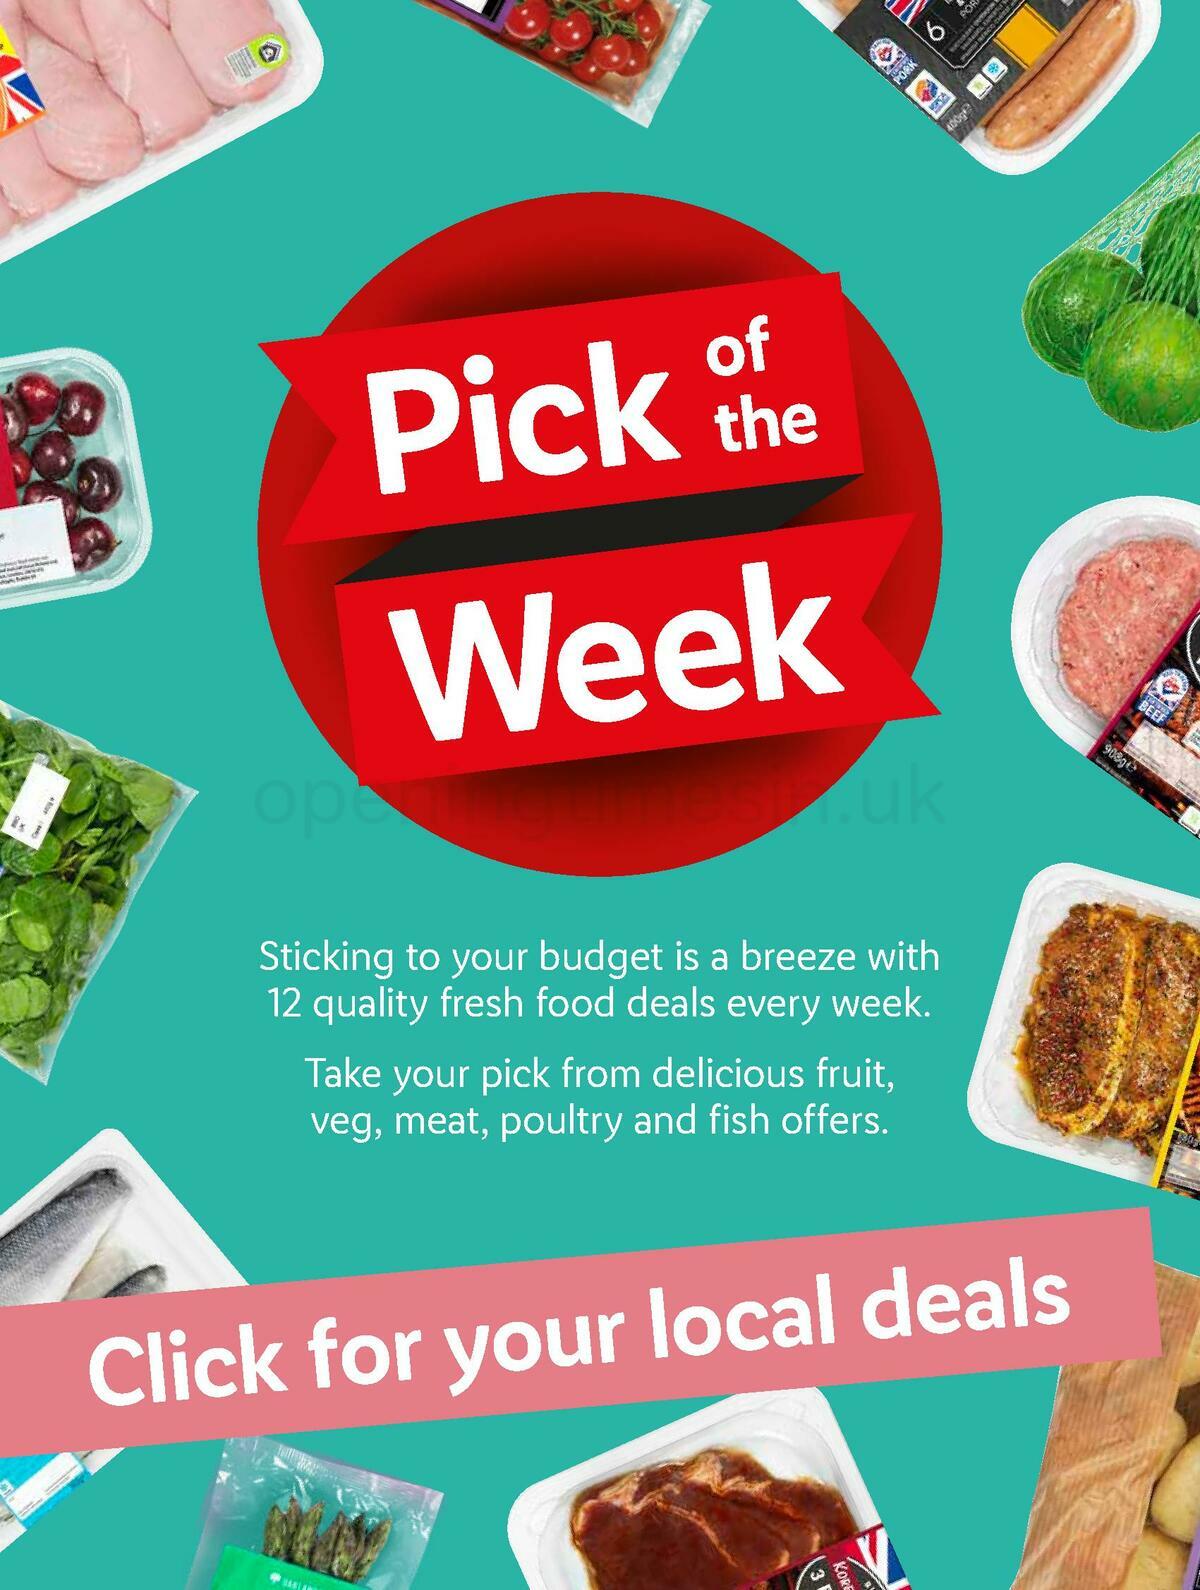 LIDL Offers from 25 August